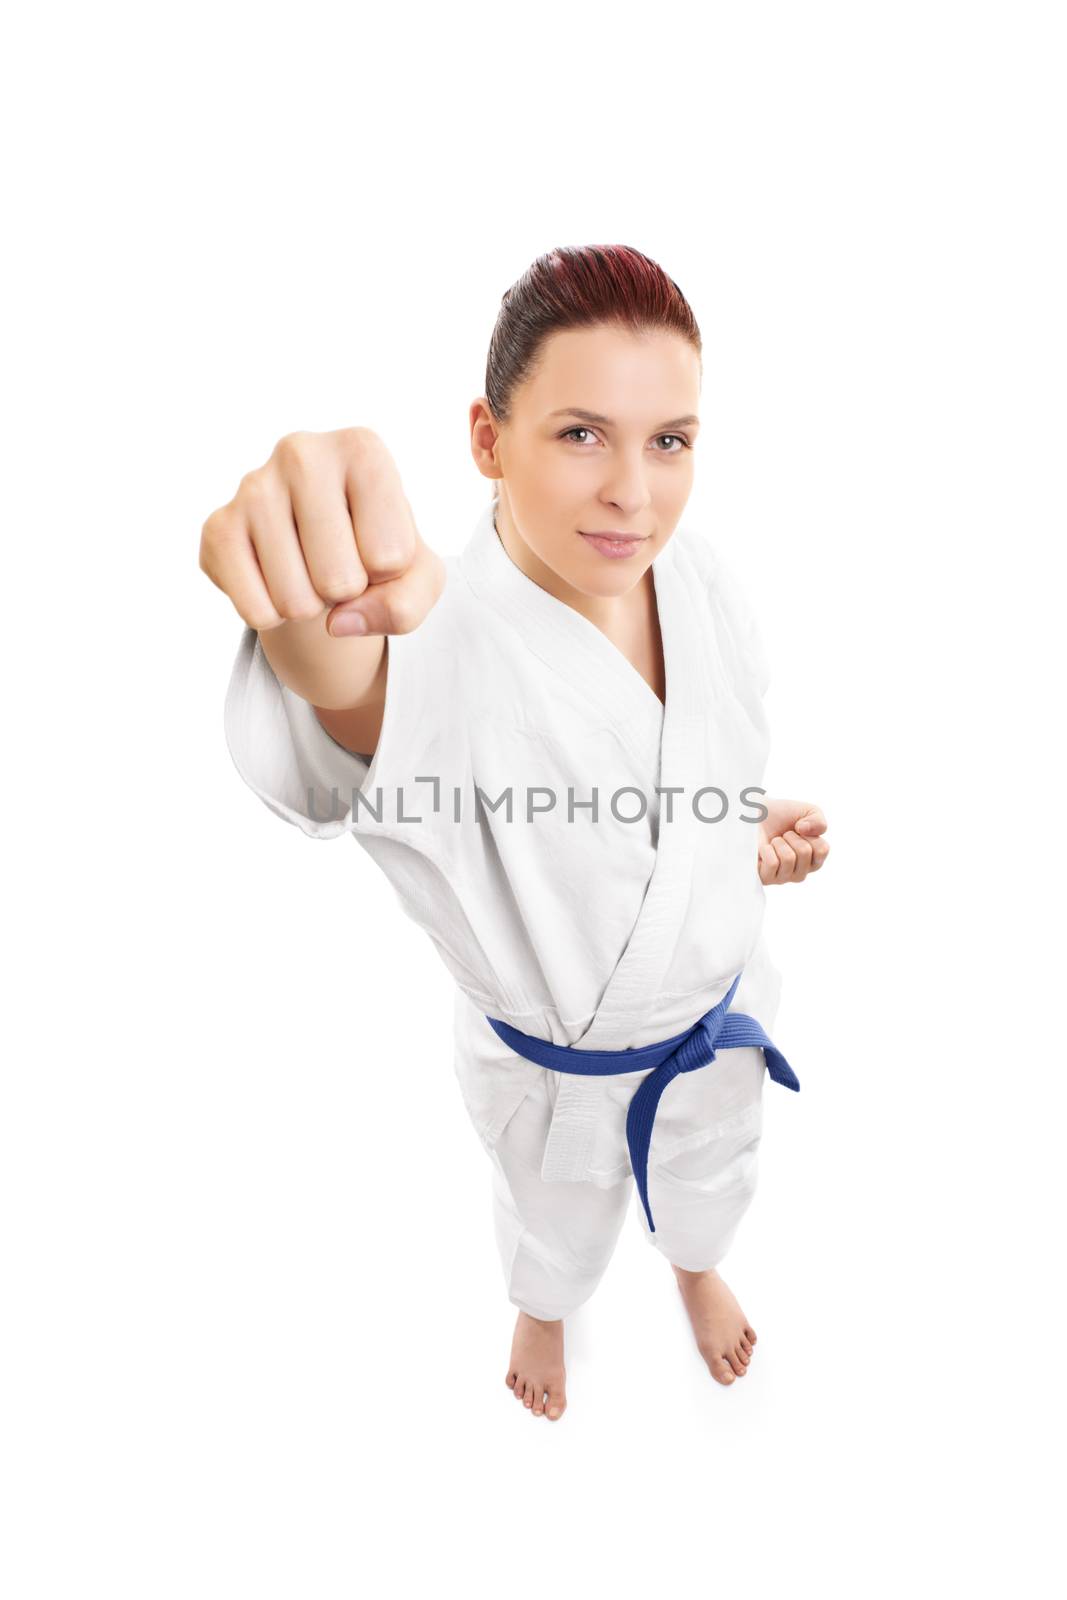 A portrait of a beautiful young female aikido fighter attacking, from top, isolated on white background.